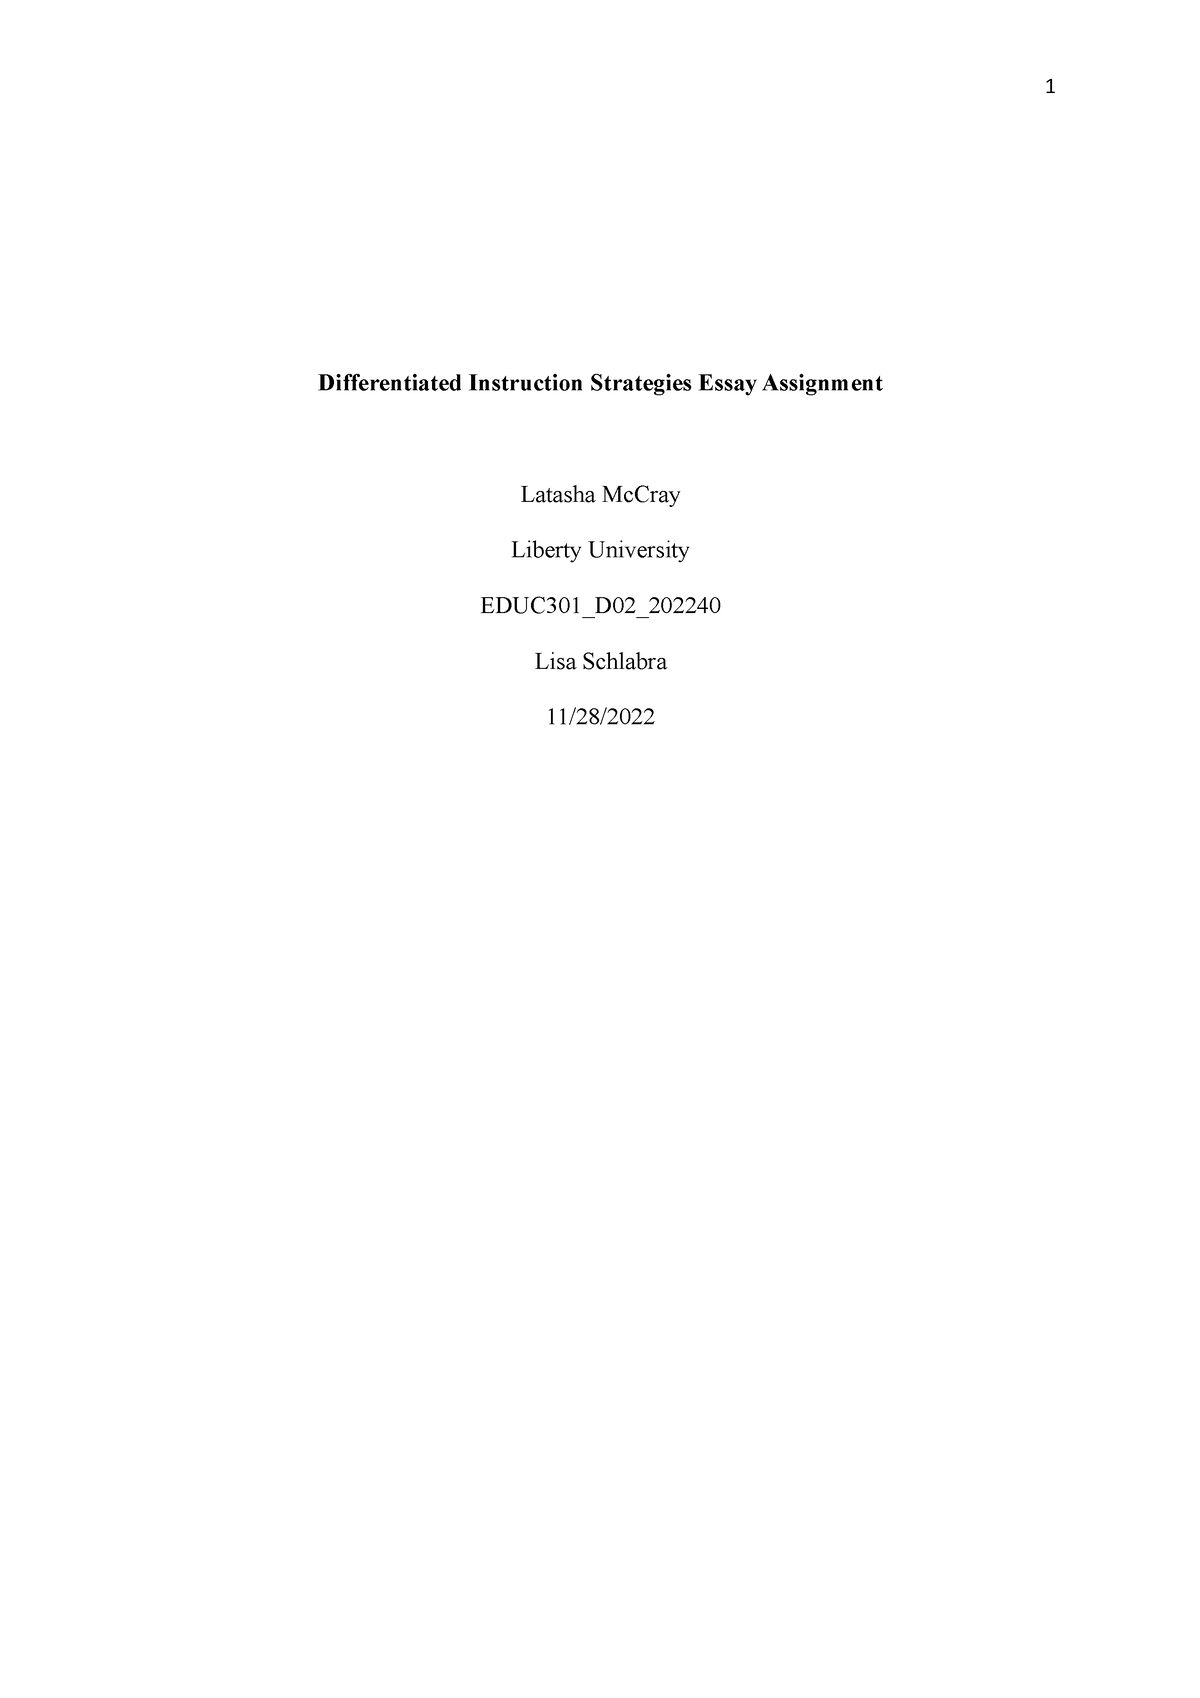 thesis about differentiated instruction